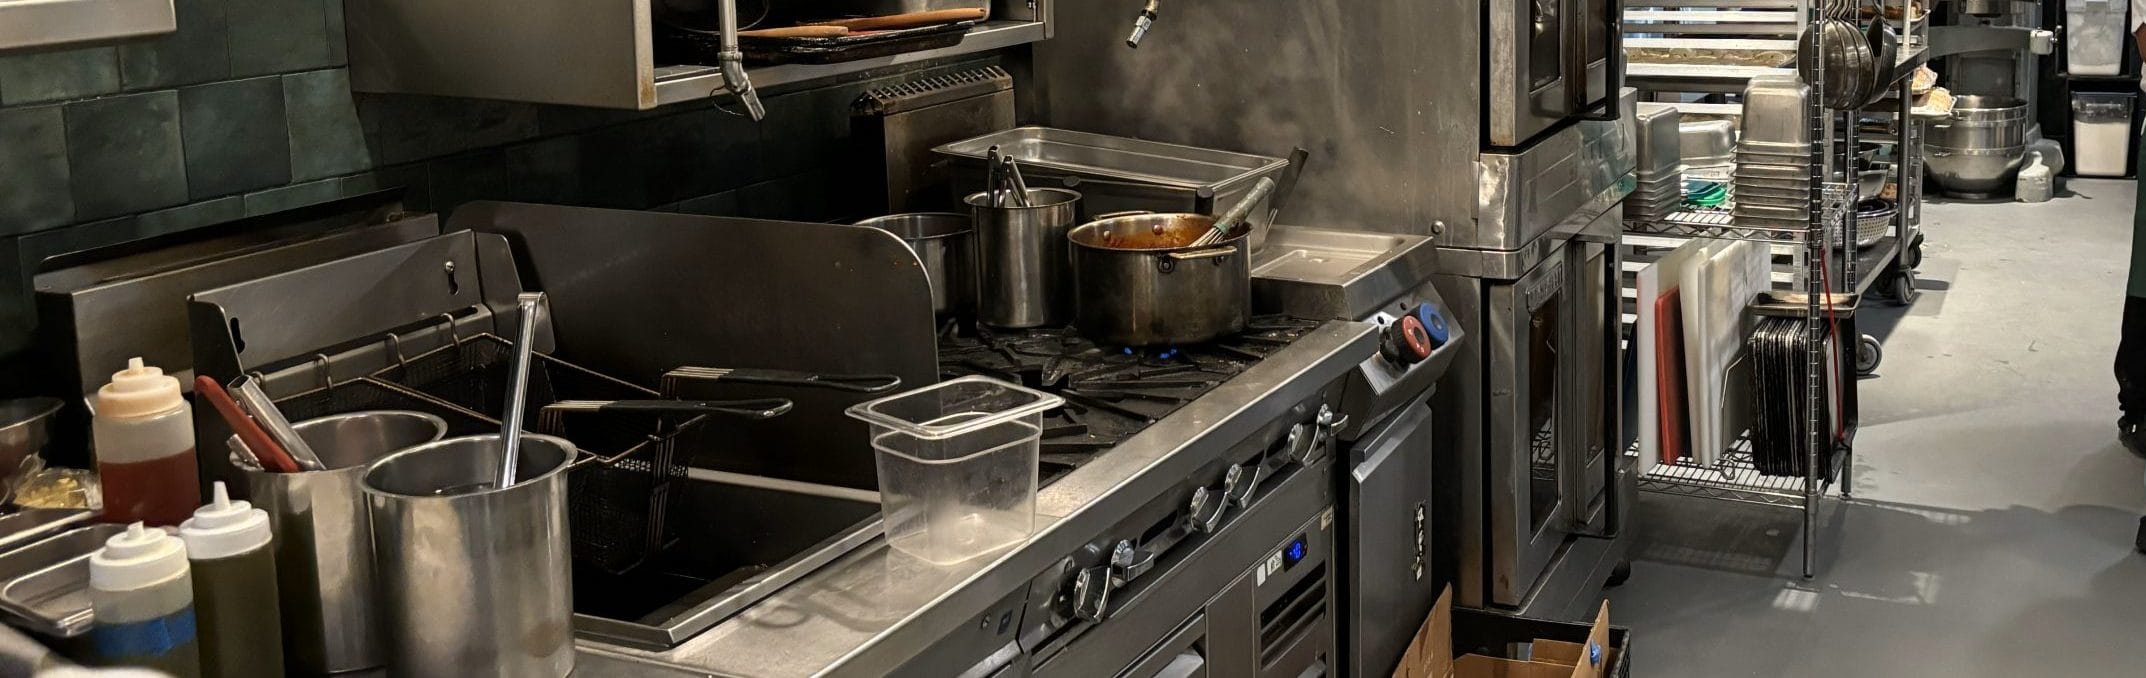 image of a stainless steel commercial kitchen showing the stove adn the air fryers and pans